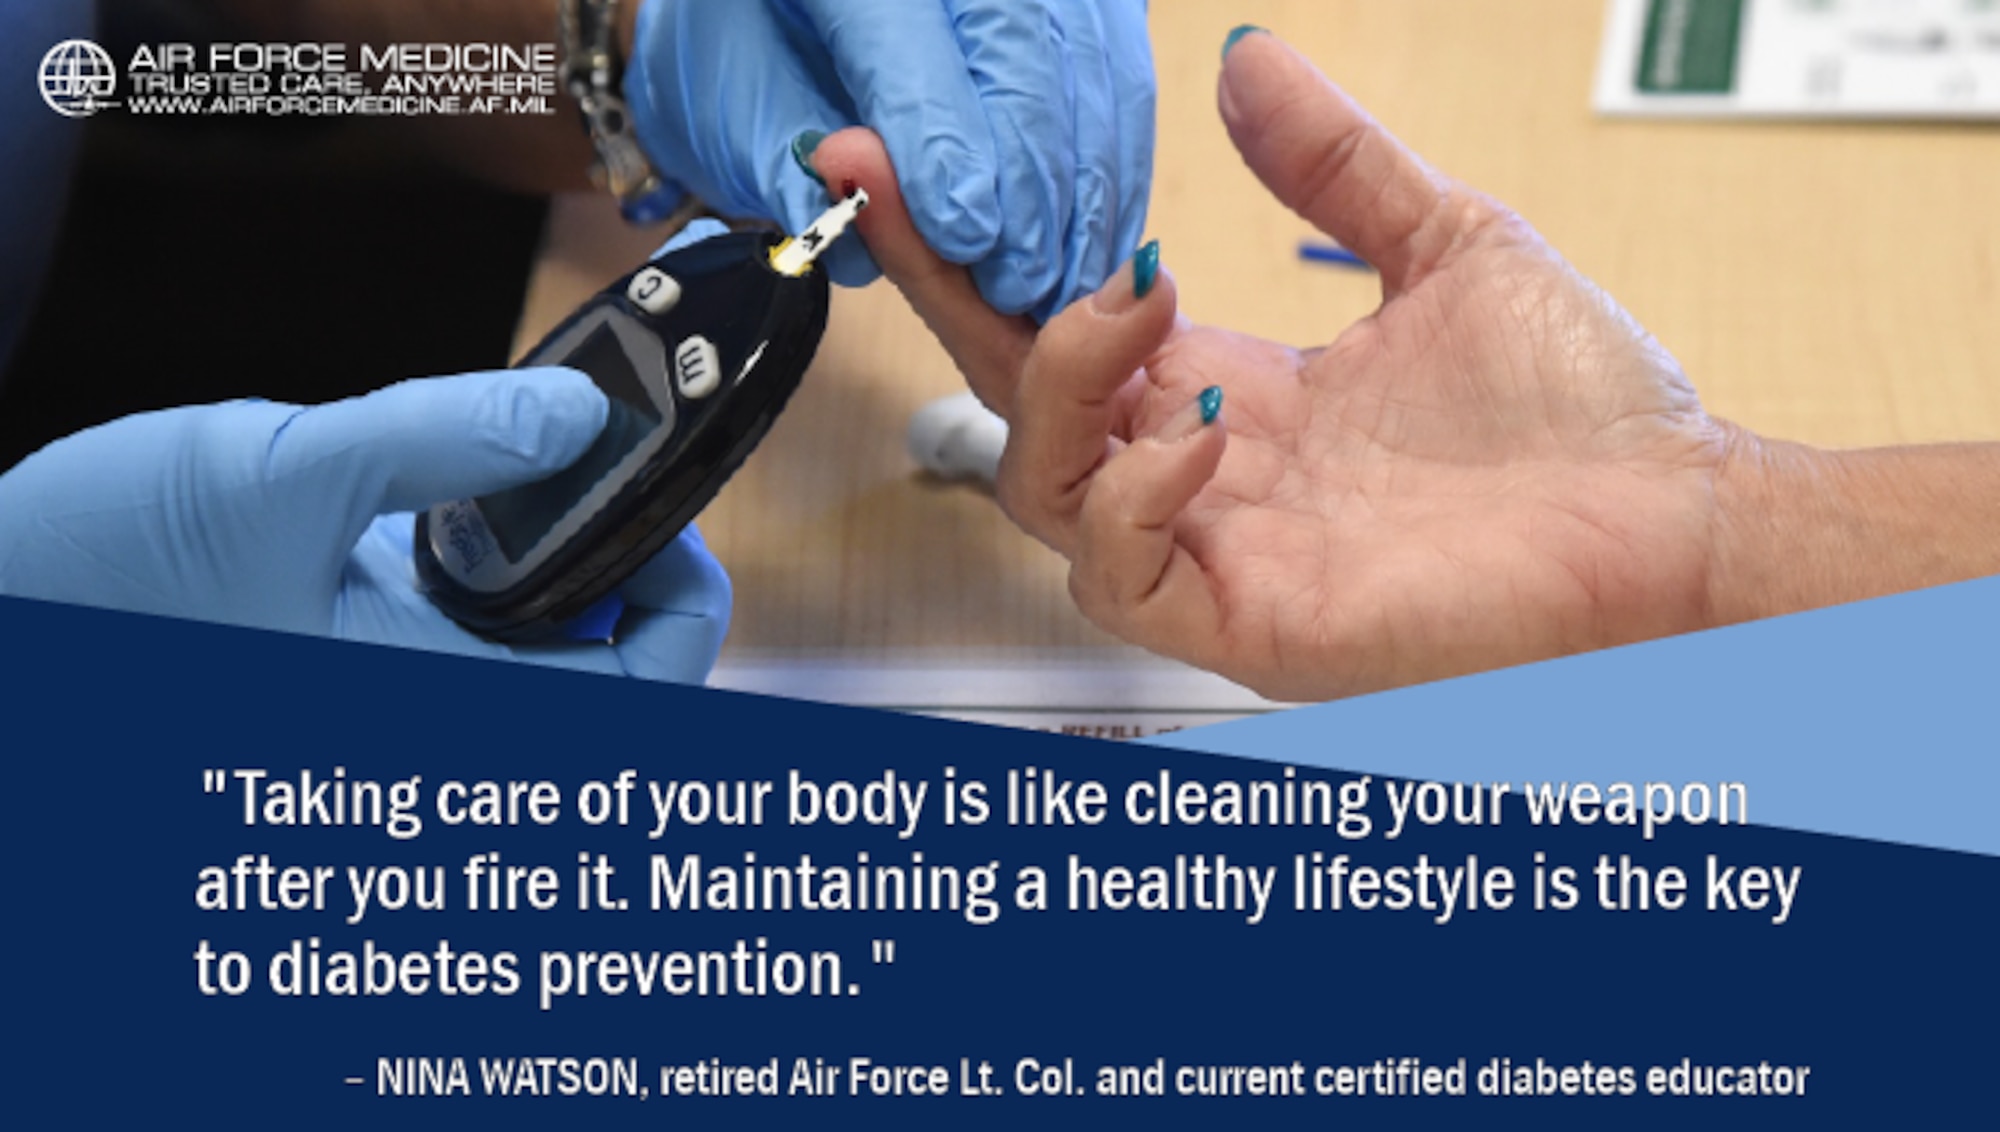 Air Force diabetes prevention program shows promising results